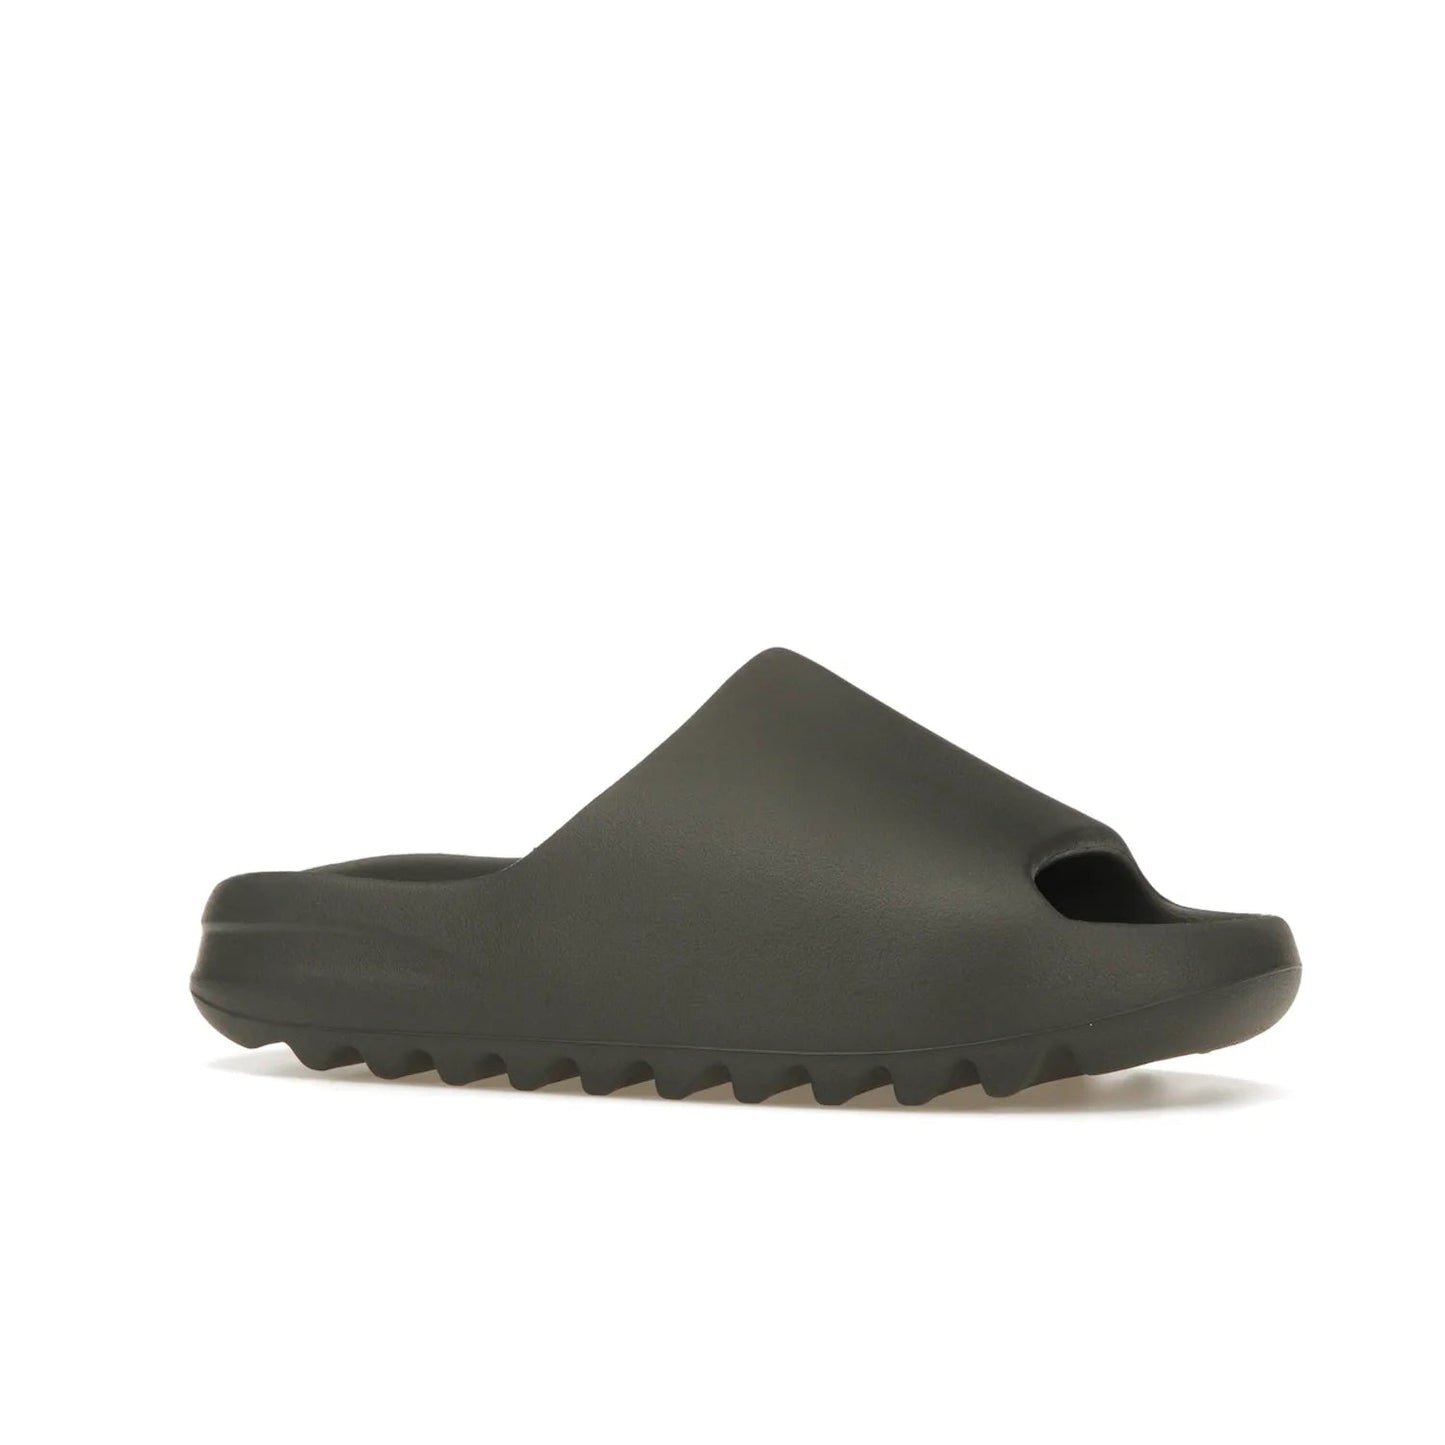 adidas Yeezy Slide Granite - Image 3 - Only at www.BallersClubKickz.com - Introducing the adidas Yeezy Slide Granite with a sleek, soft-to-touch one-piece upper – perfect for making a statement with its minimalistic design and luxurious comfort. Get yours now for only $70.